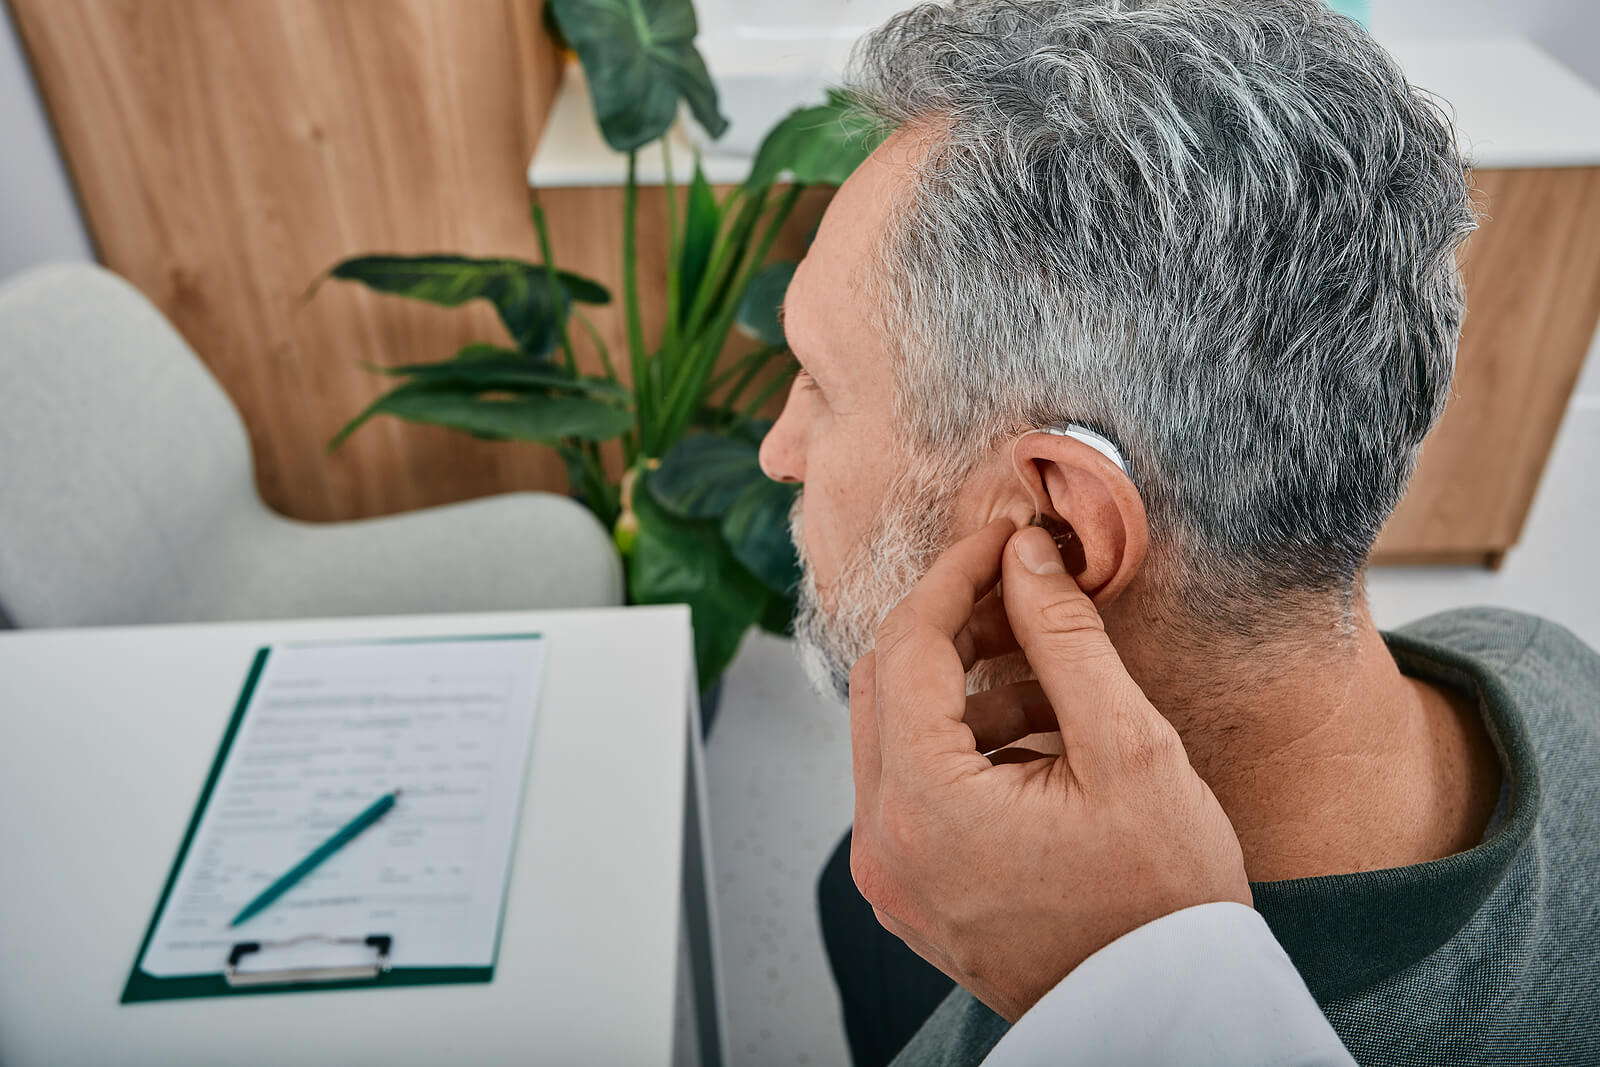 The role of audiologists in hearing aid fitting and programming